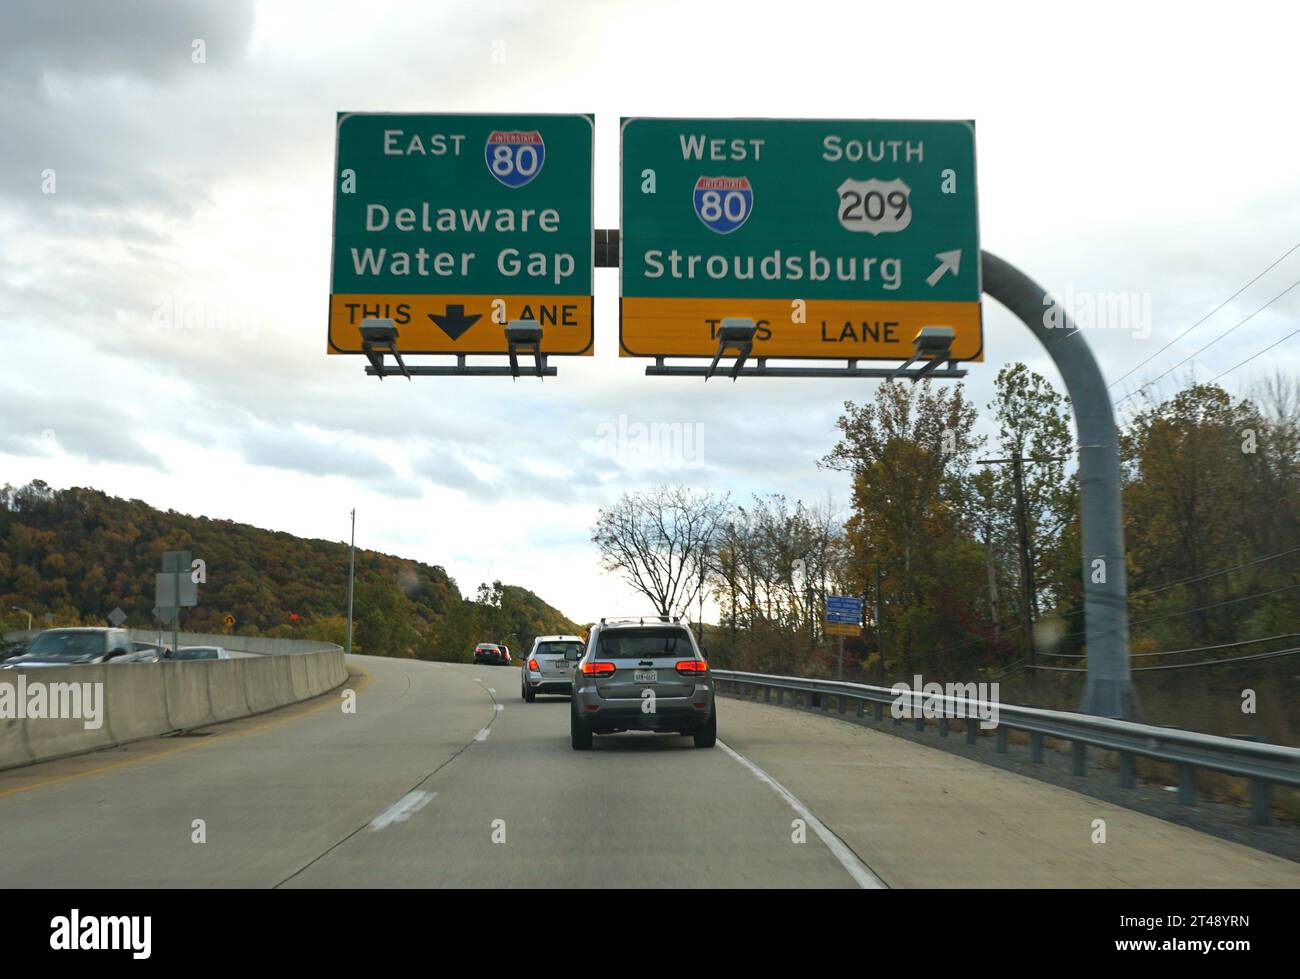 Poconos County, Pennsylvania, U.S.A - October 21, 2023 - A road sign of the Interstate 80 splits into Delaware Water Gap, Stroudsburg and 209 South Stock Photo